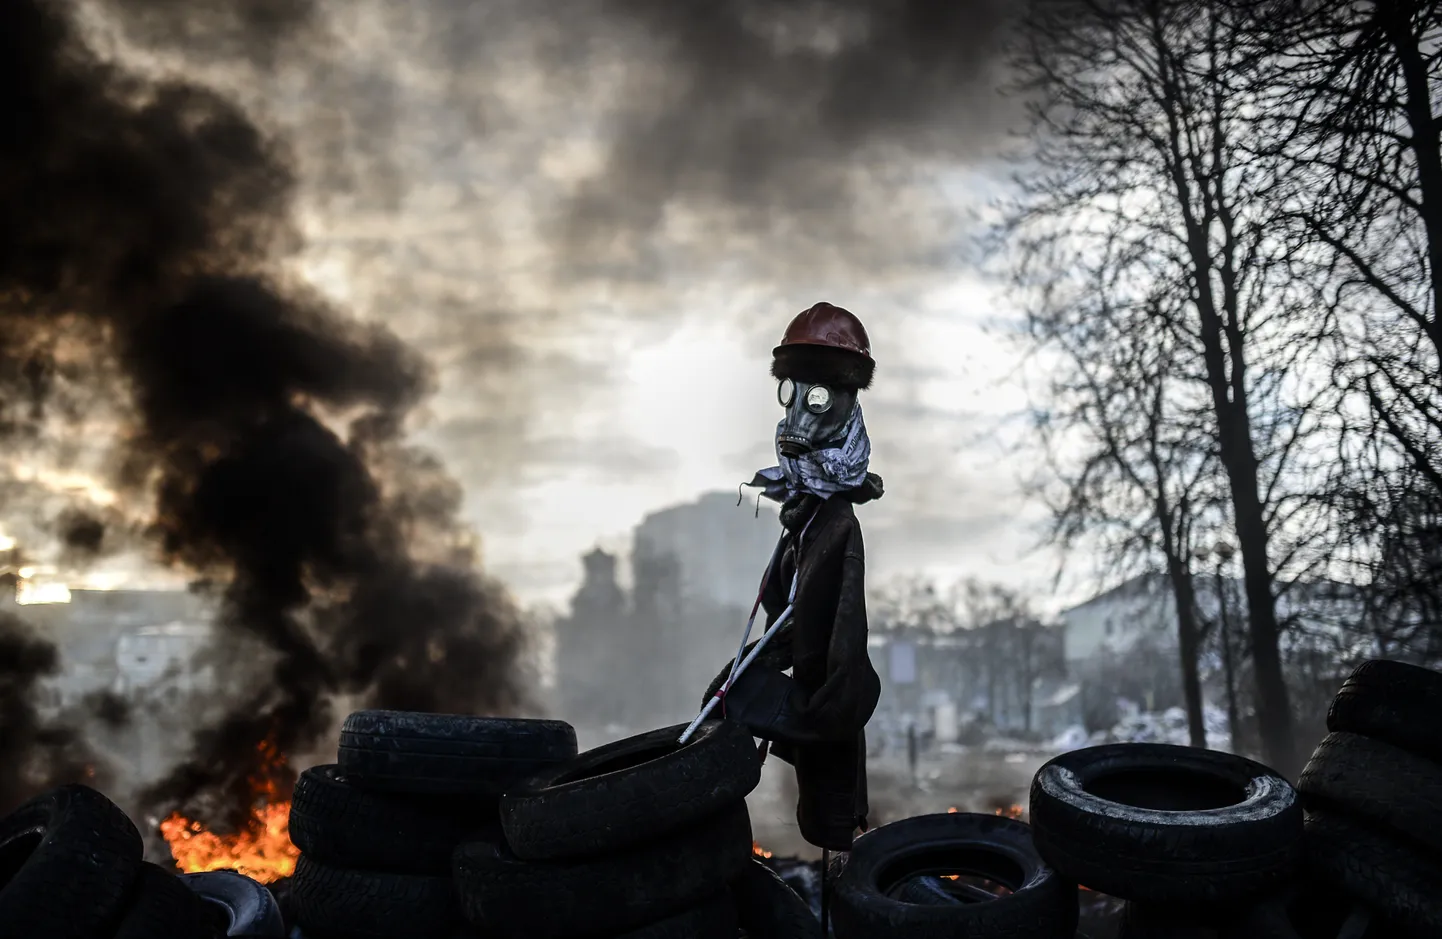 A scarecrow like mock anti-government protestor is pictured on a barricade between protestors and government forces on February 21, 2014 in Kiev. Armed protesters stormed police barricades in Kiev on Thursday in renewed violence that killed at least 26 people and shattered an hours-old truce as EU envoys held crisis talks with Ukraine's embattled president. Bodies of anti-government demonstrators lay amid smouldering debris after masked protesters hurling Molotov cocktails and stones forced police from Kiev's iconic Independence Square -- the epicentre of the ex-Soviet country's three-month-old crisis. AFP PHOTO  / BULENT KILIC